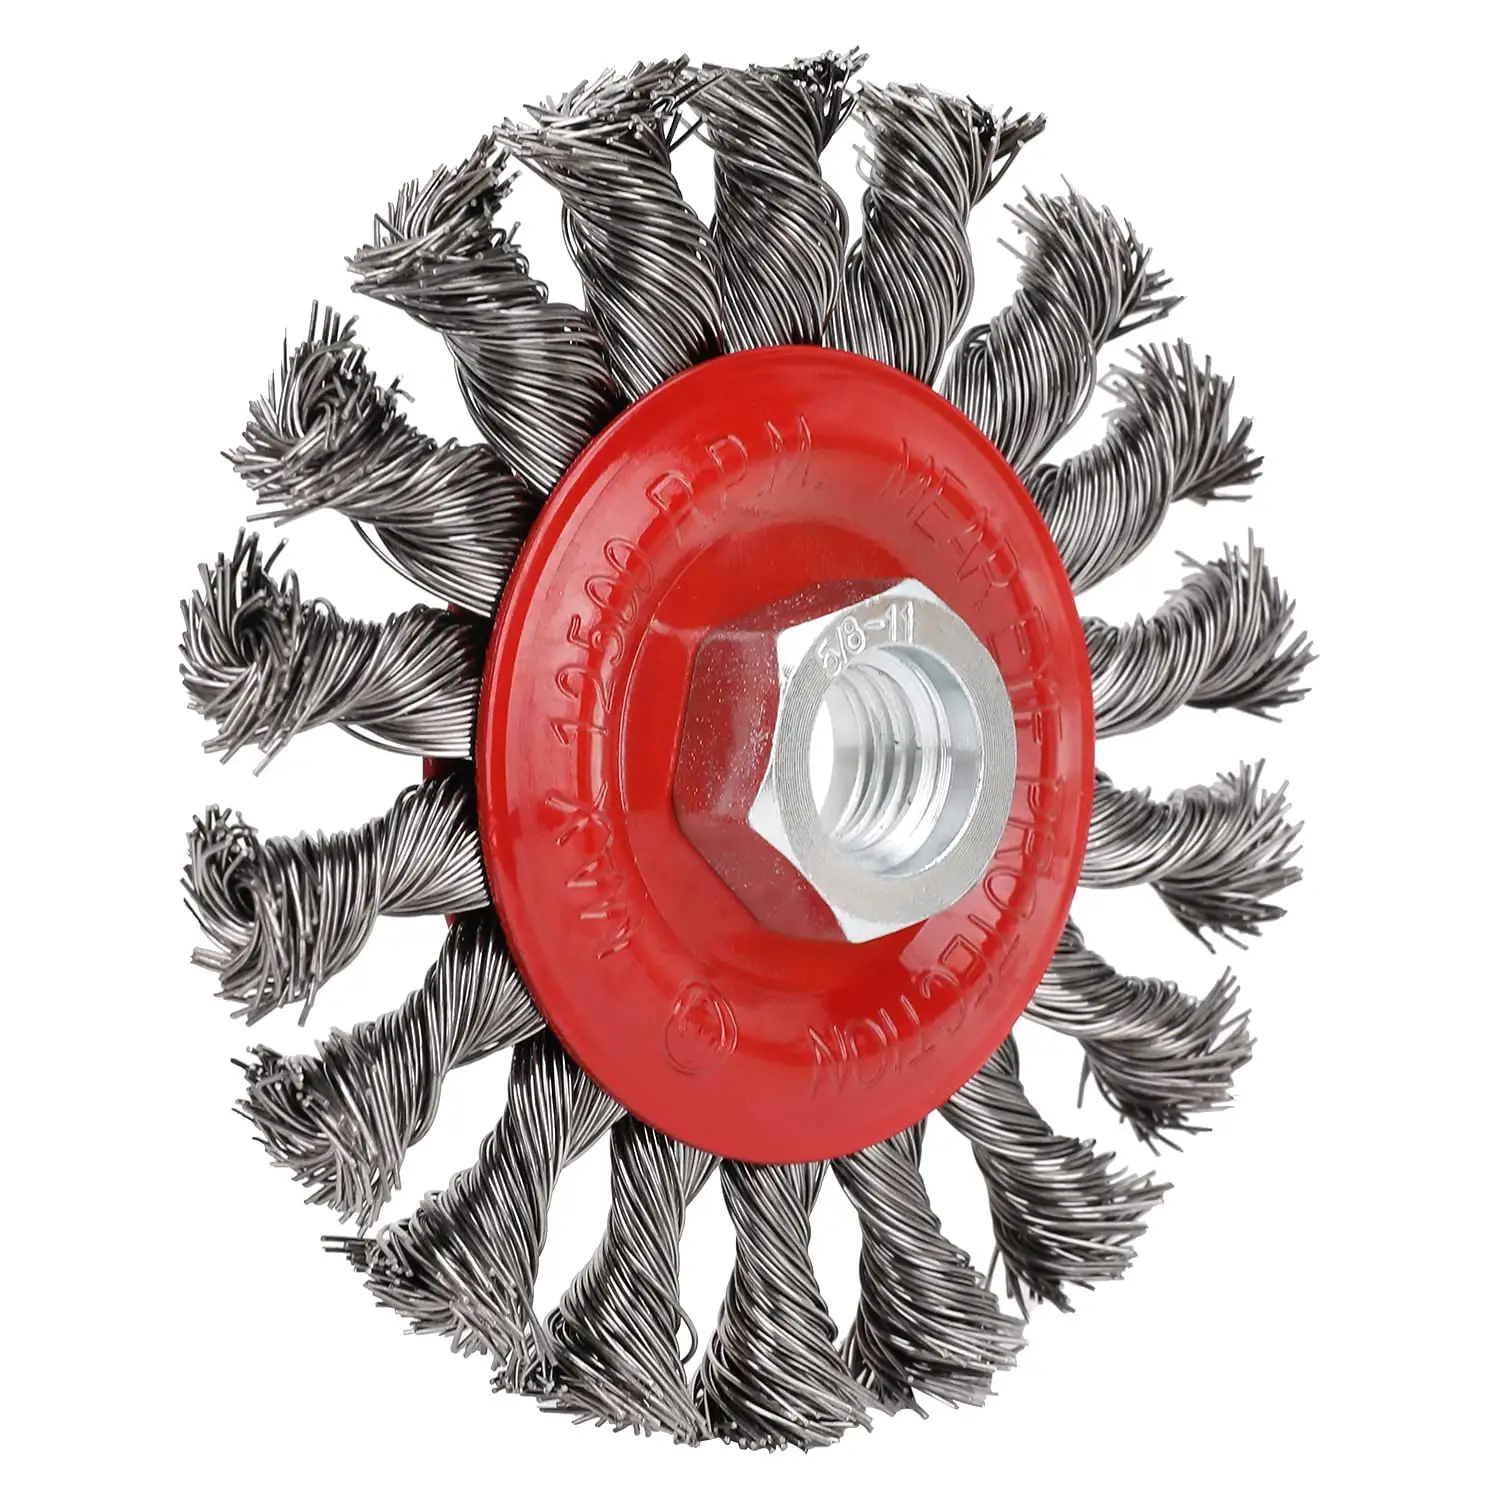 M14 M10 Screw Twist Knot Wire Wheel Cup Brush For Angle Grinder Steel Wire & Alloy Metals Twisted & Crimped Wire Brushes